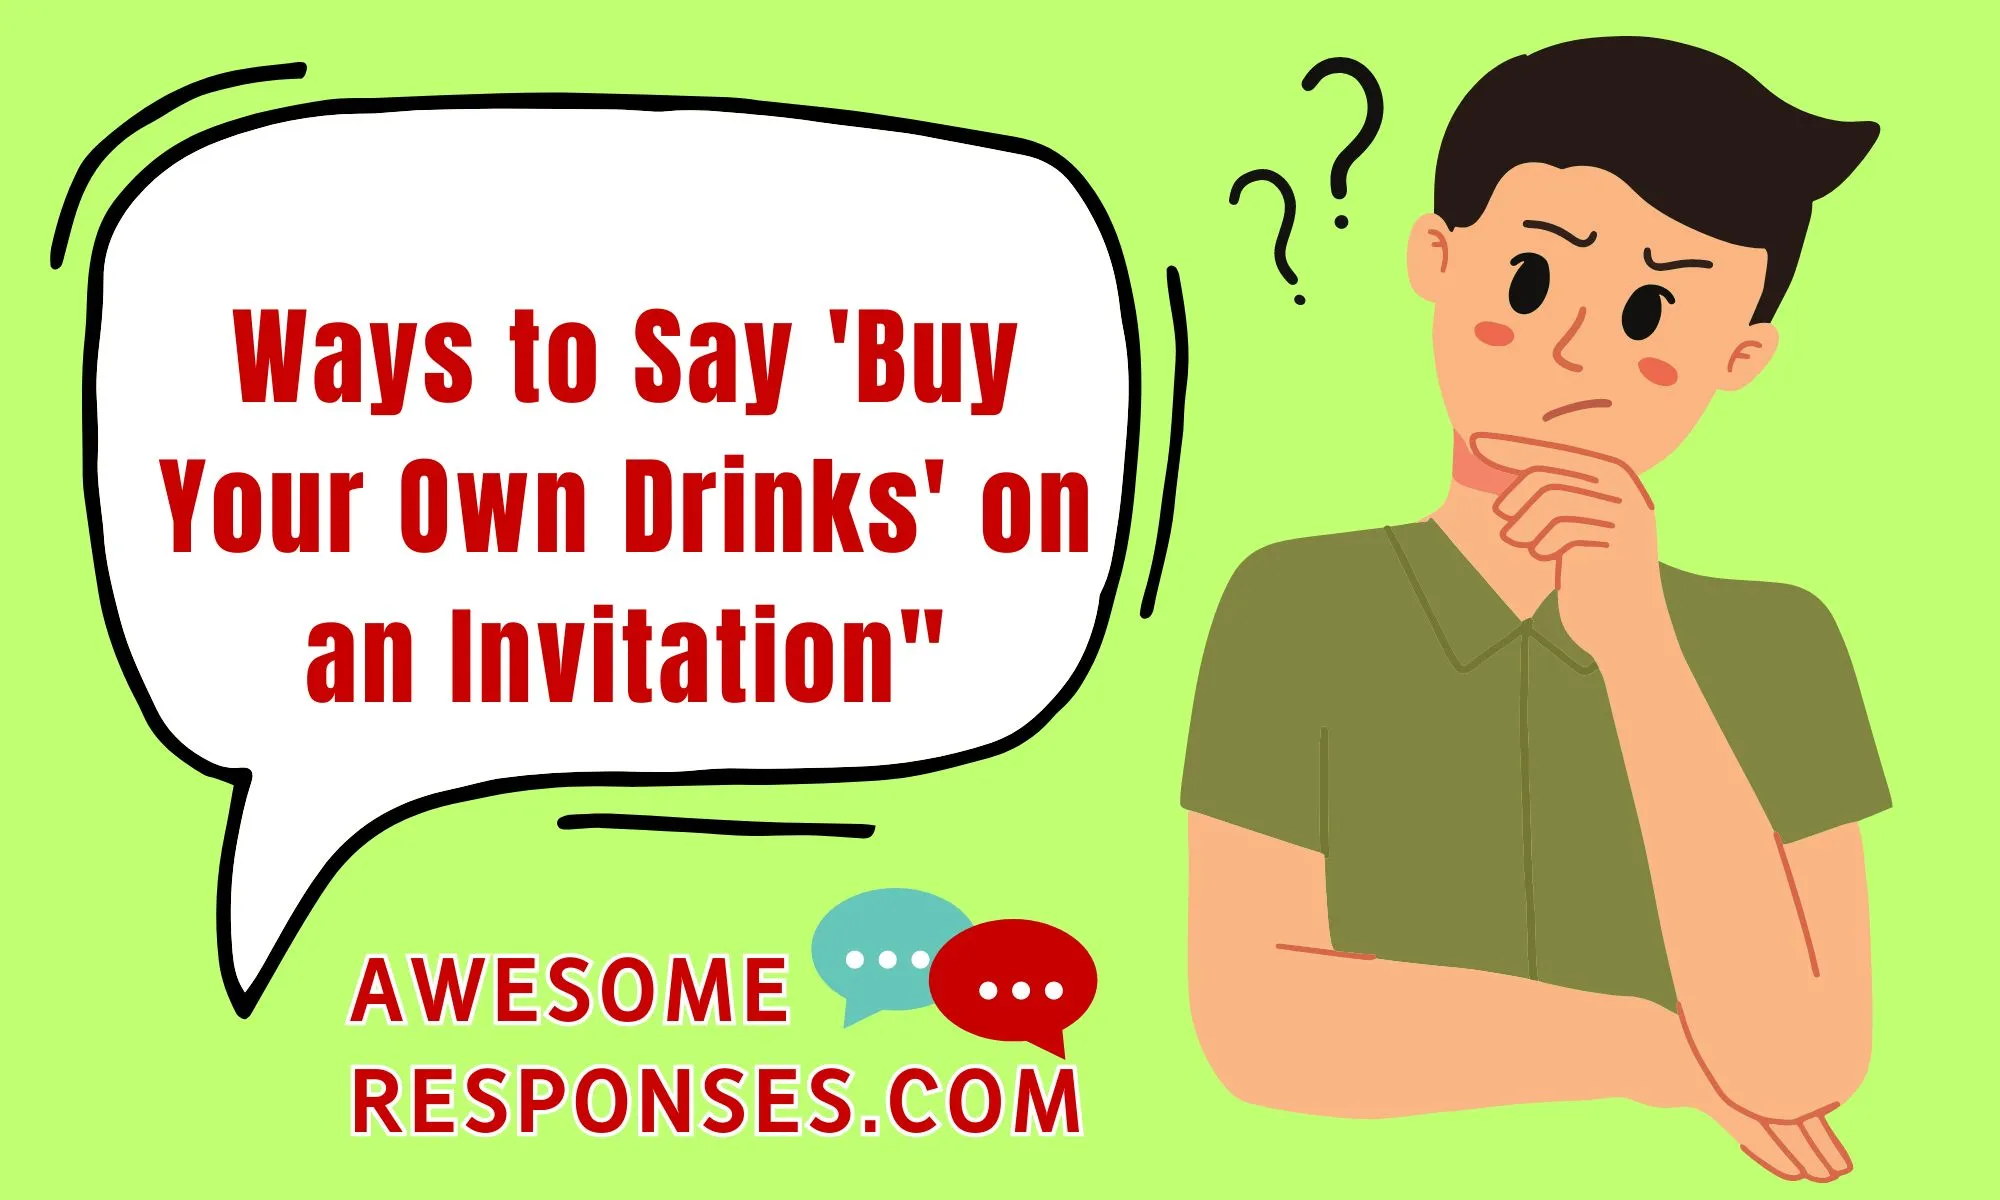 Ways to Say 'Buy Your Own Drinks' on an Invitation"